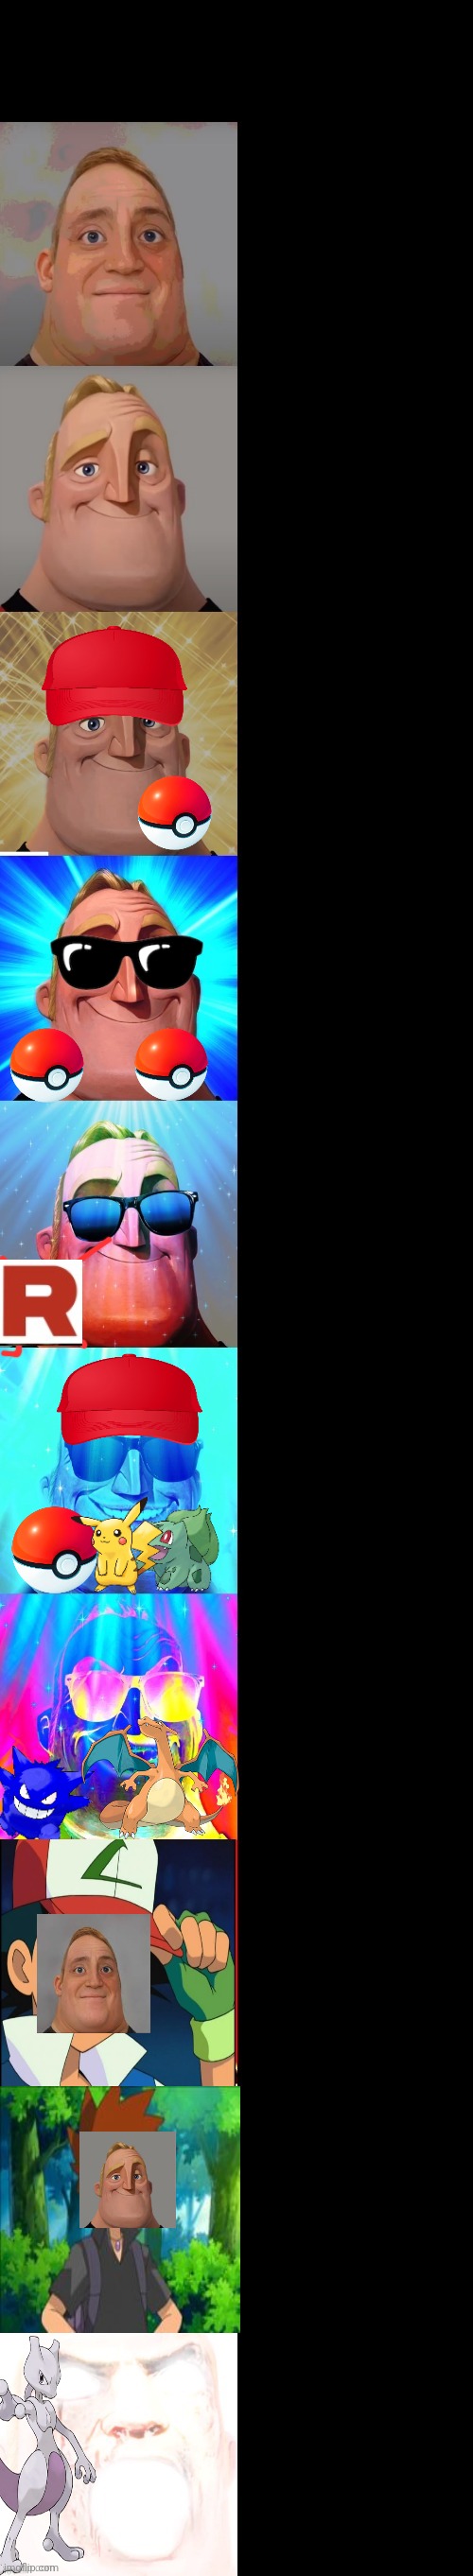 High Quality Mr. Incredible becoming Pokemon trainer Blank Meme Template